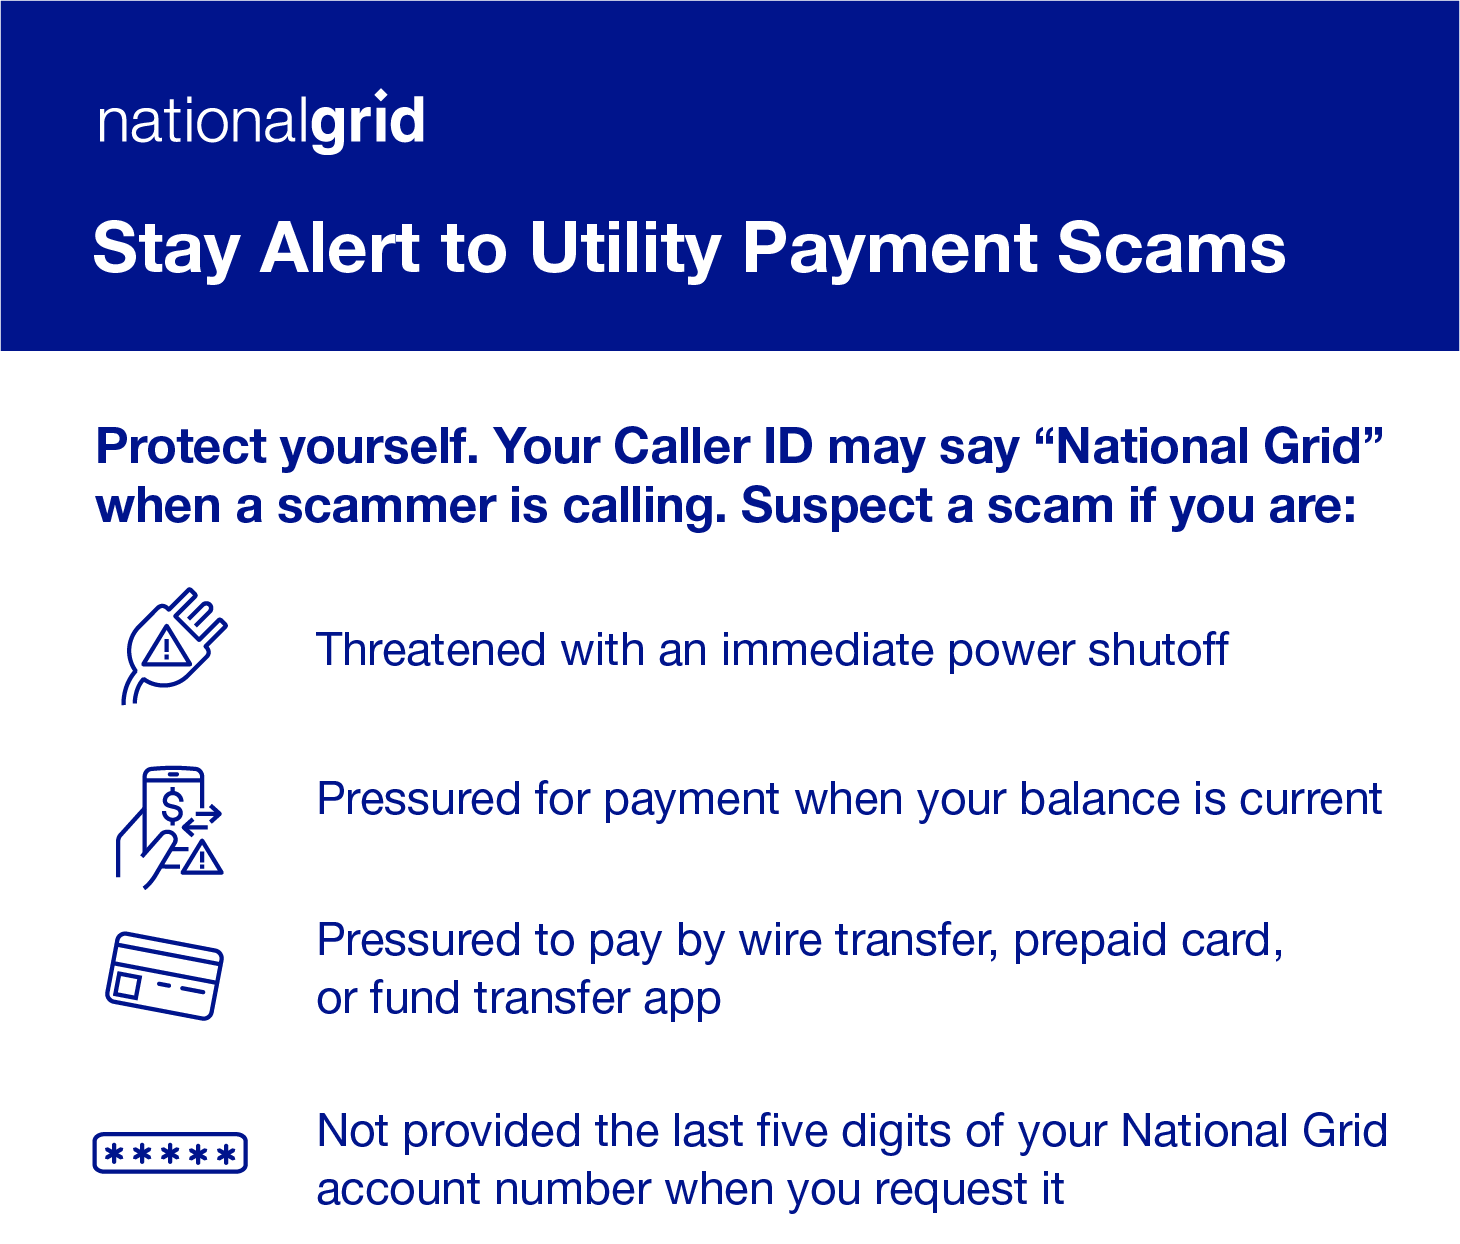 Stay Alert to Utility Payment Scams